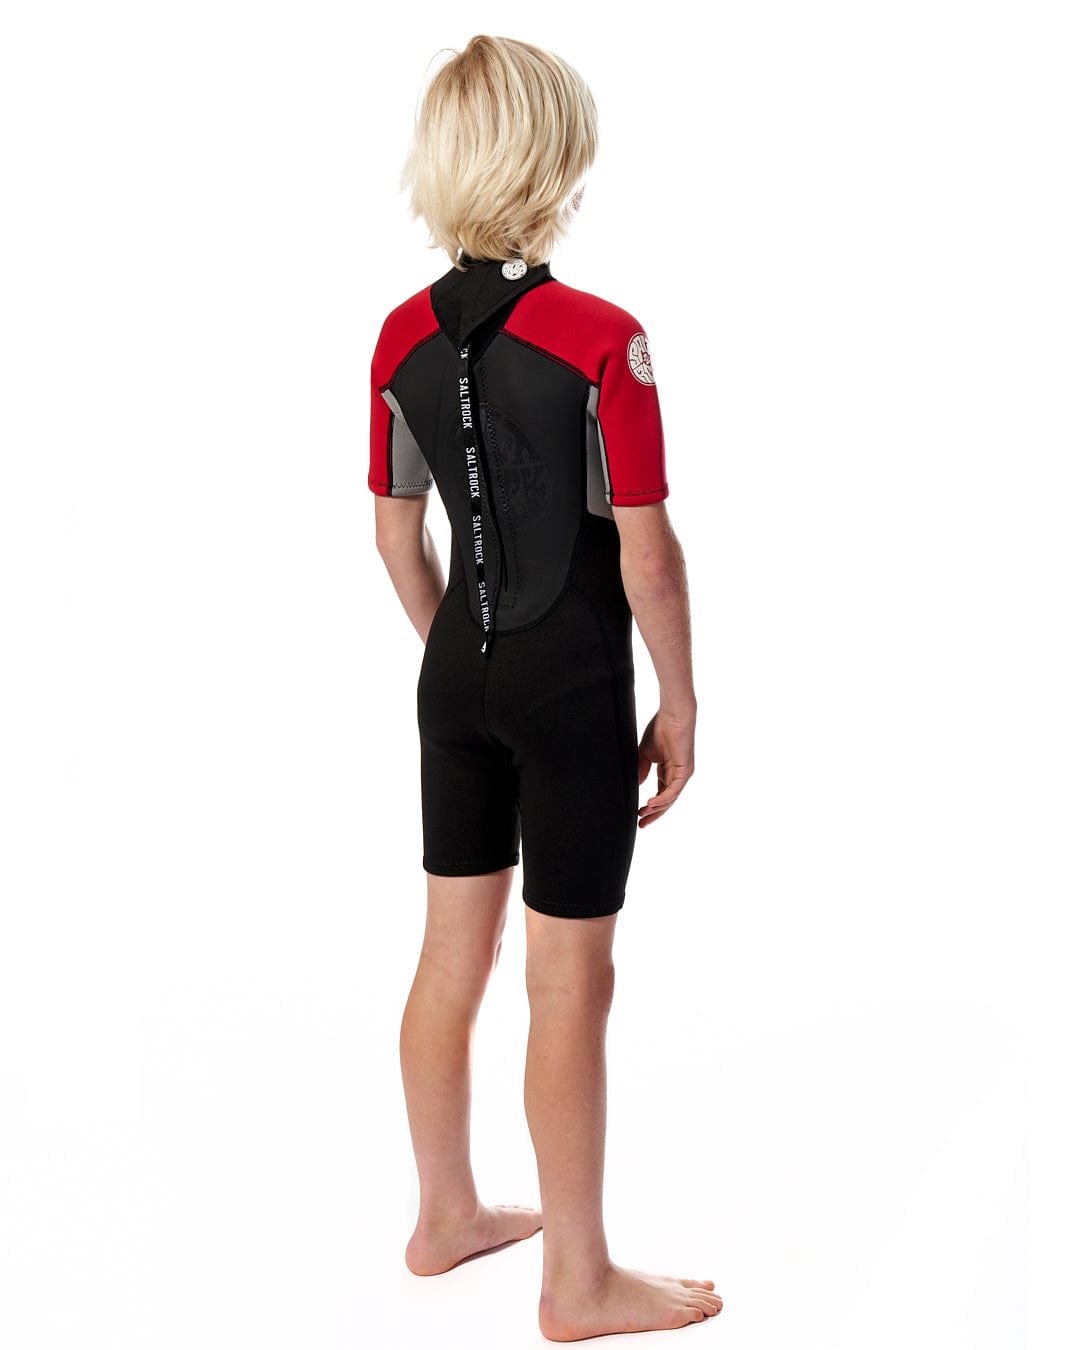 The back view of a young boy in a Saltrock Core - 3/2 Shortie Wetsuit - Red.